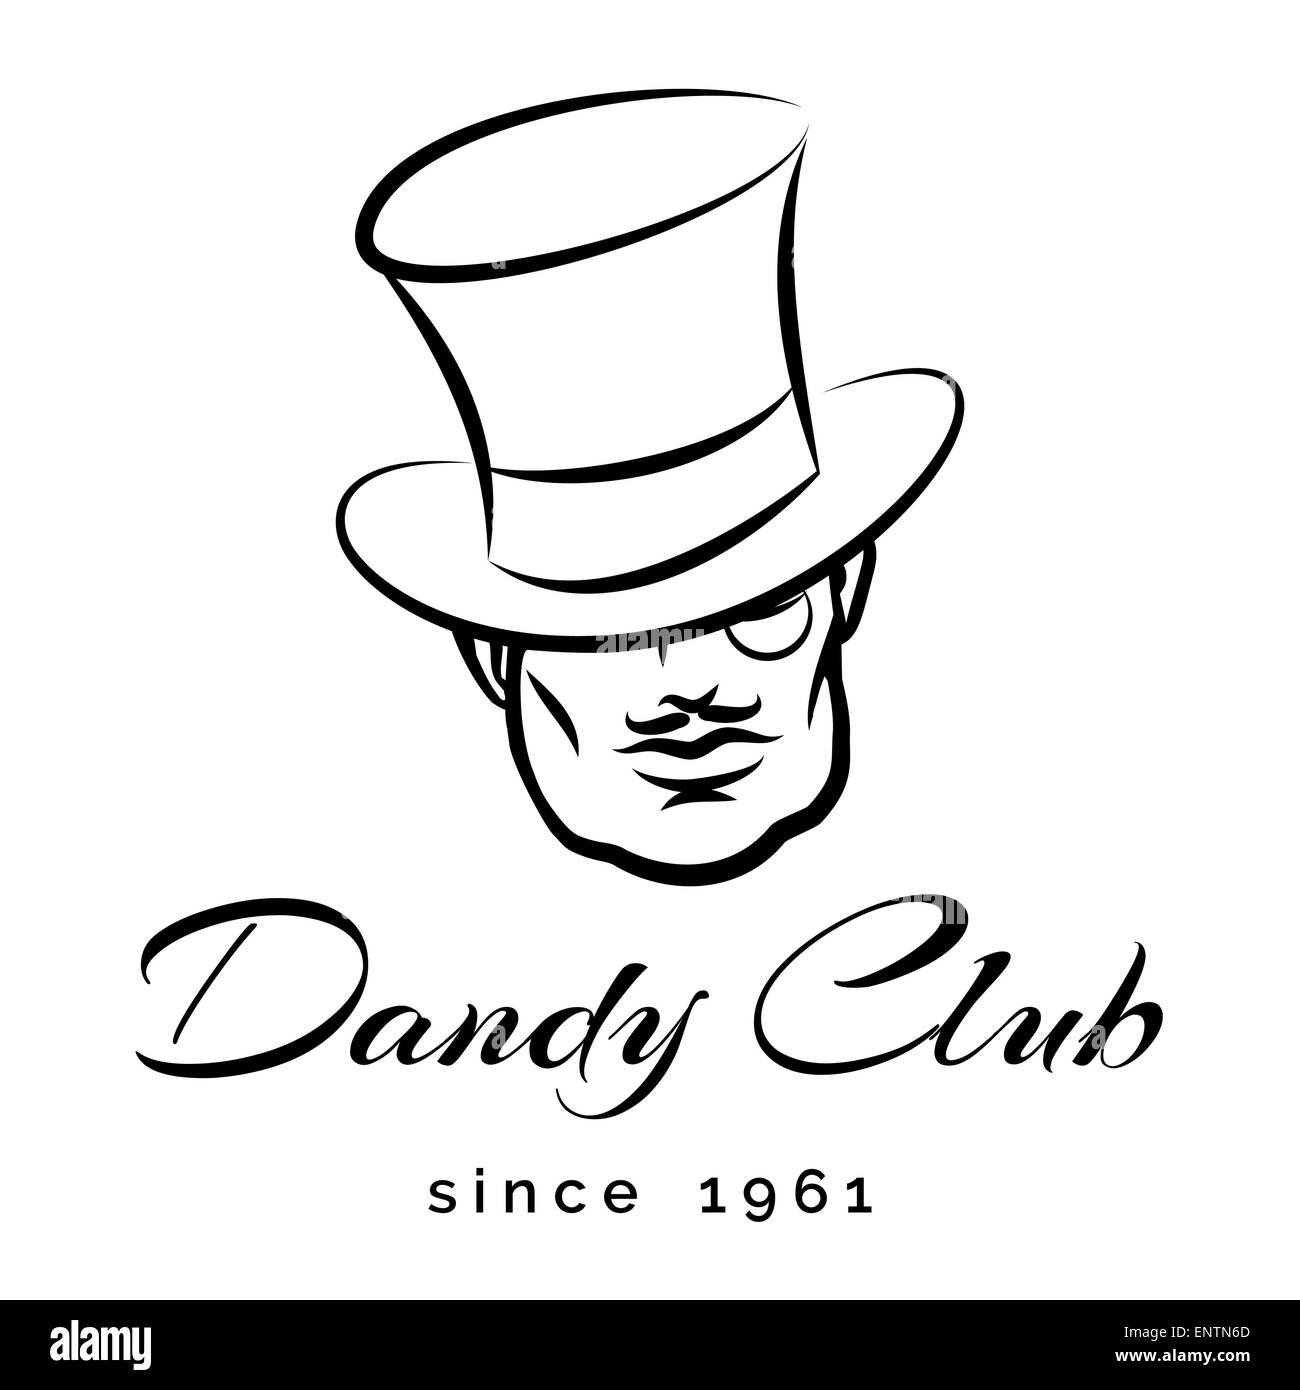 Dandy or Gentlemen Club logo or emblem. Only free fonts used. Isolated on white backround. Stock Vector